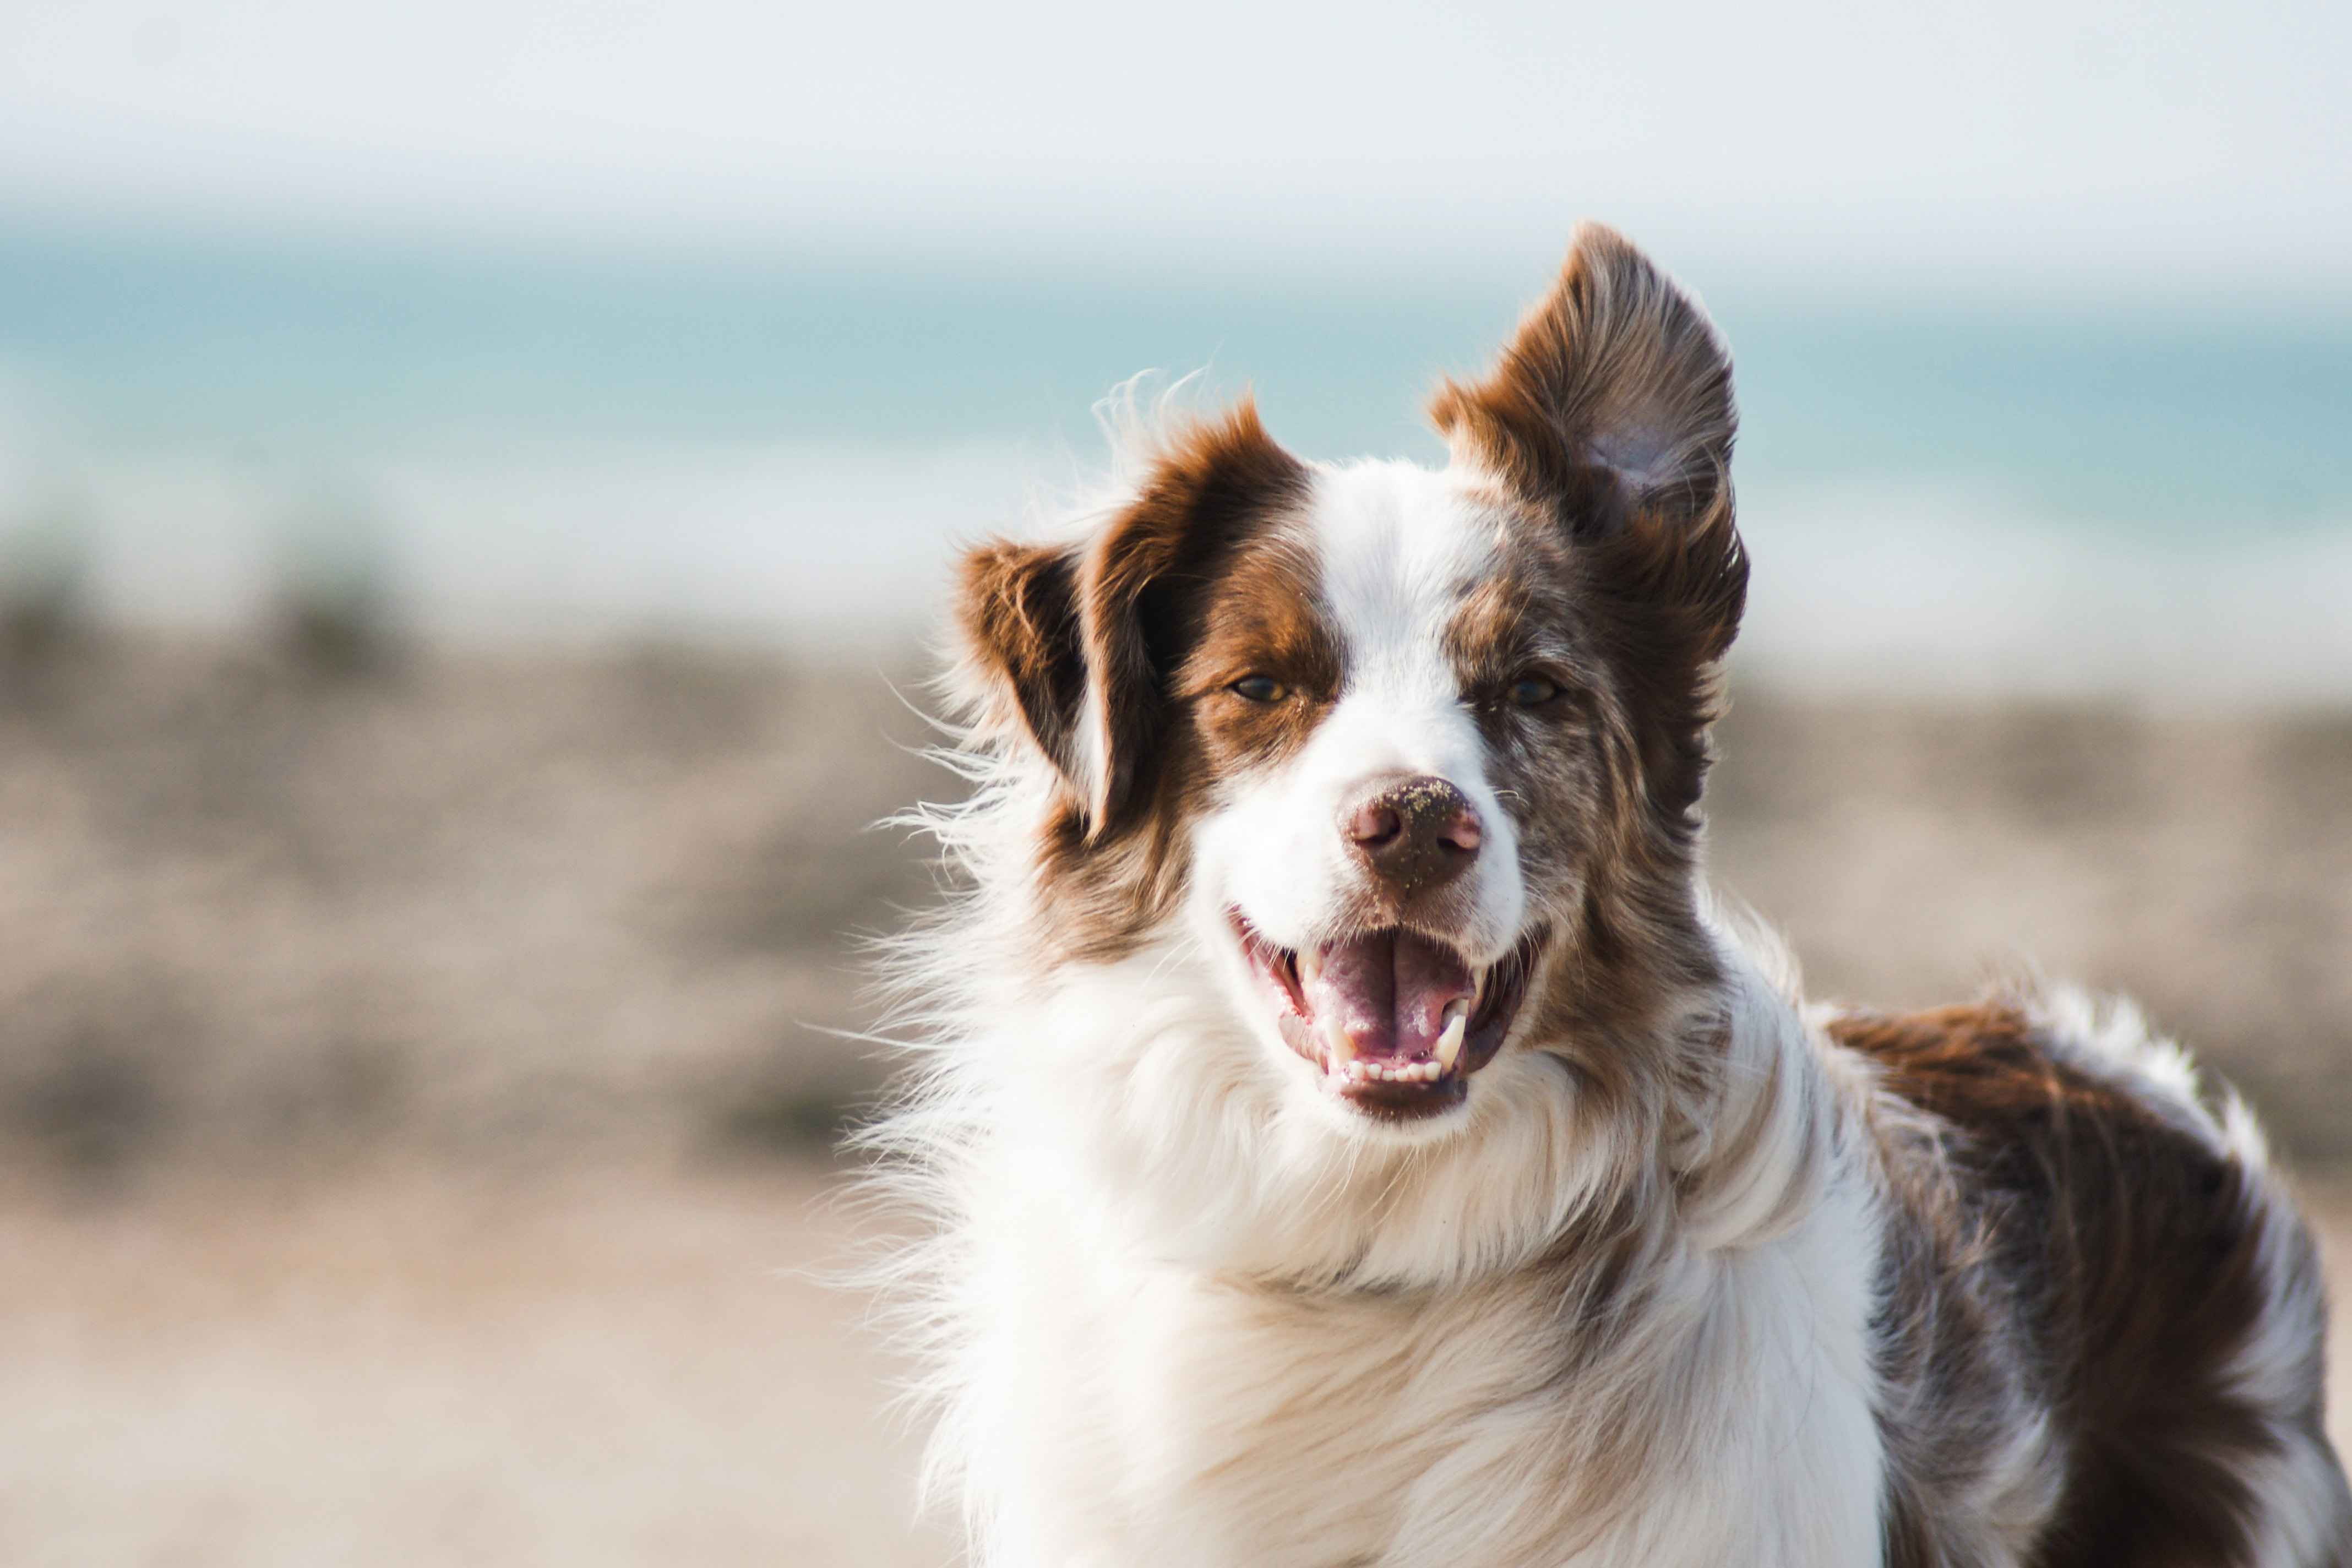 Border Collies and Other Dogs: Understanding Their Social Behavior